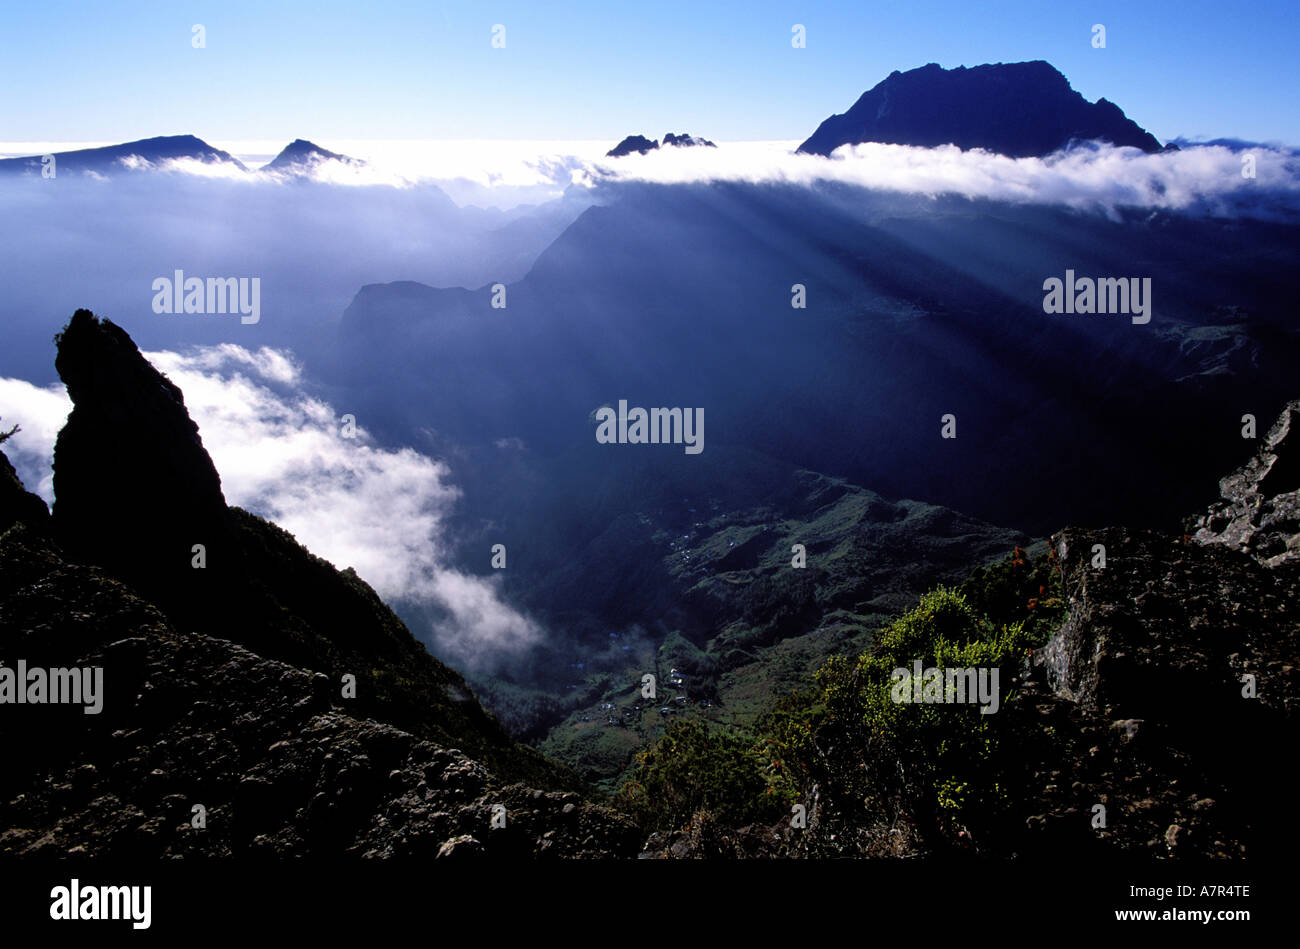 French overseas department, Reunion island, Cirque de Mafate, la Nouvelle islet and Piton des Neiges mountain Stock Photo